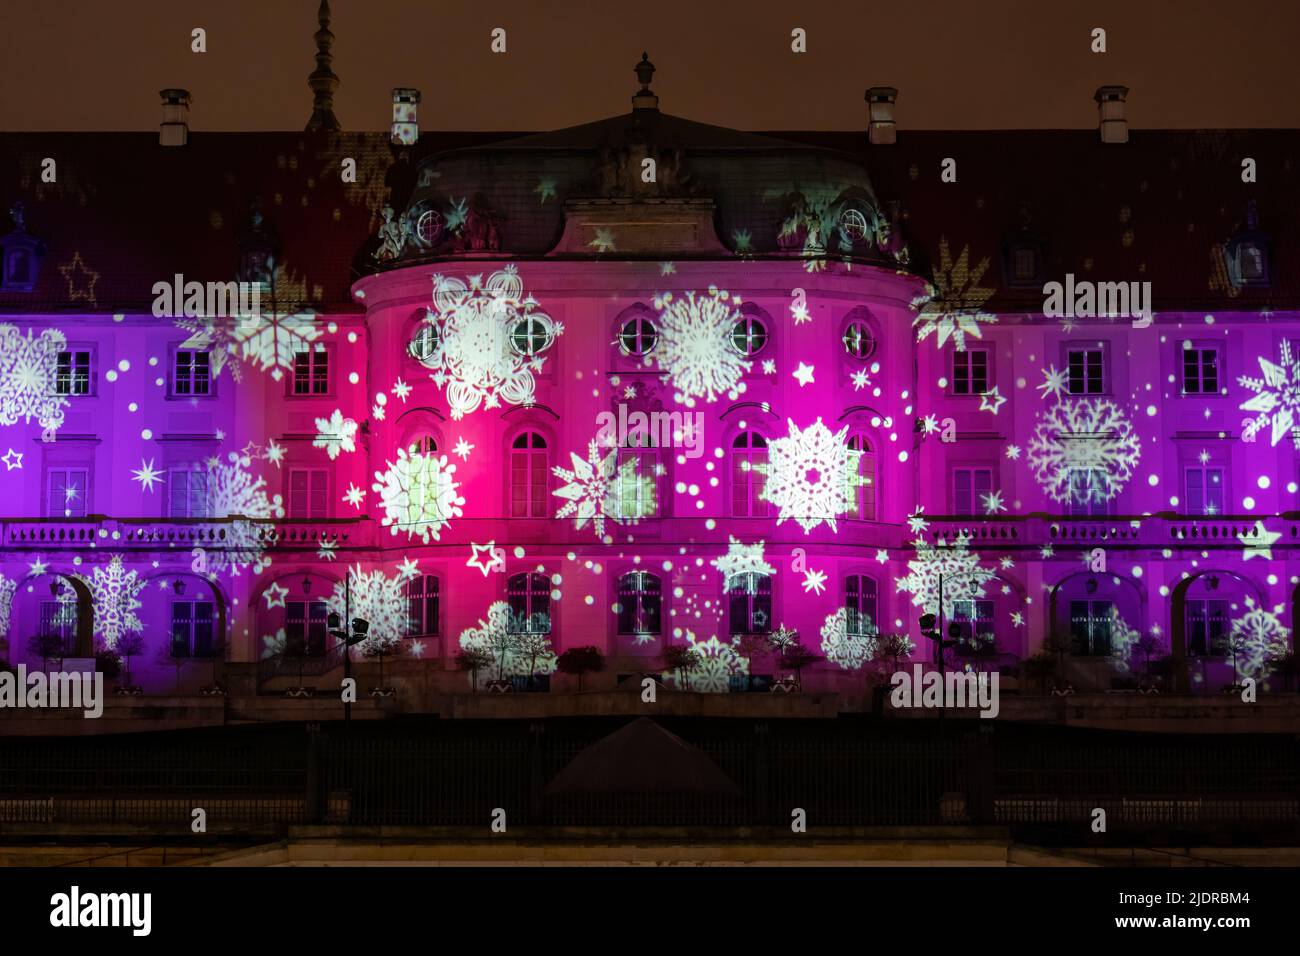 Warsaw, Poland, Royal Castle facade illuminated at night with falling snowflakes effect during Christmas holiday season in winter time. Stock Photo